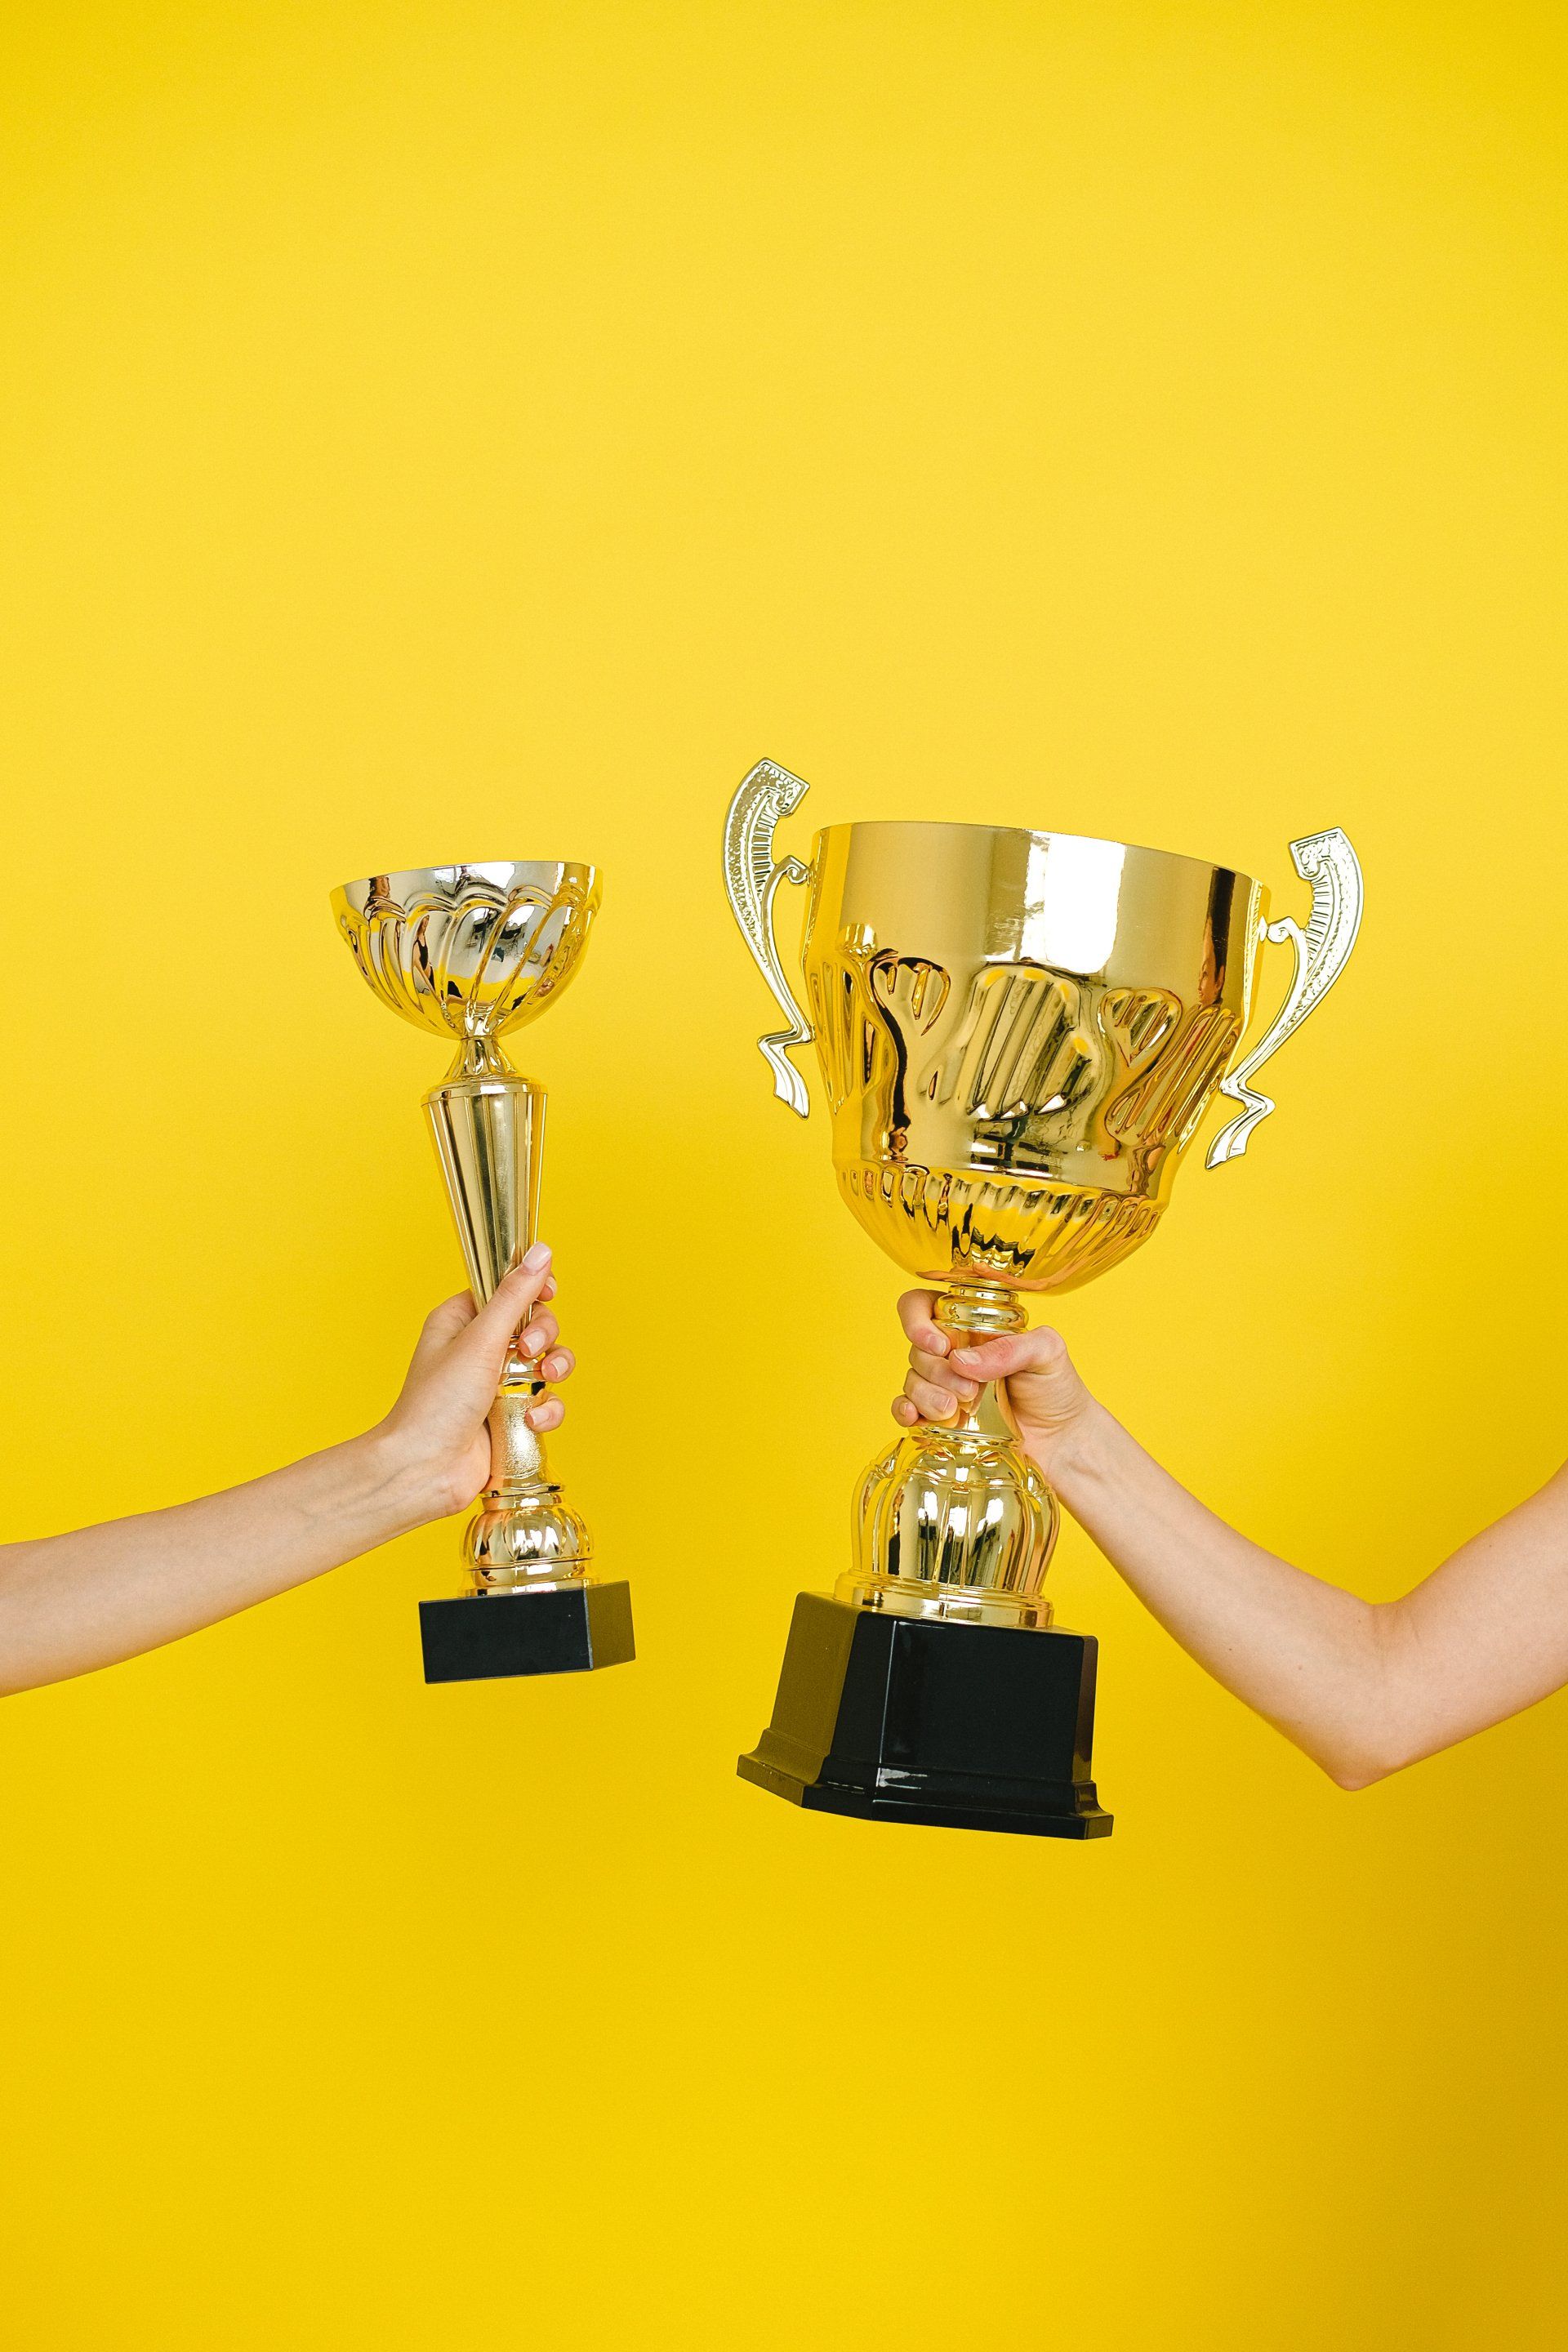 Two arms hold golden trophies in front of a yellow background.